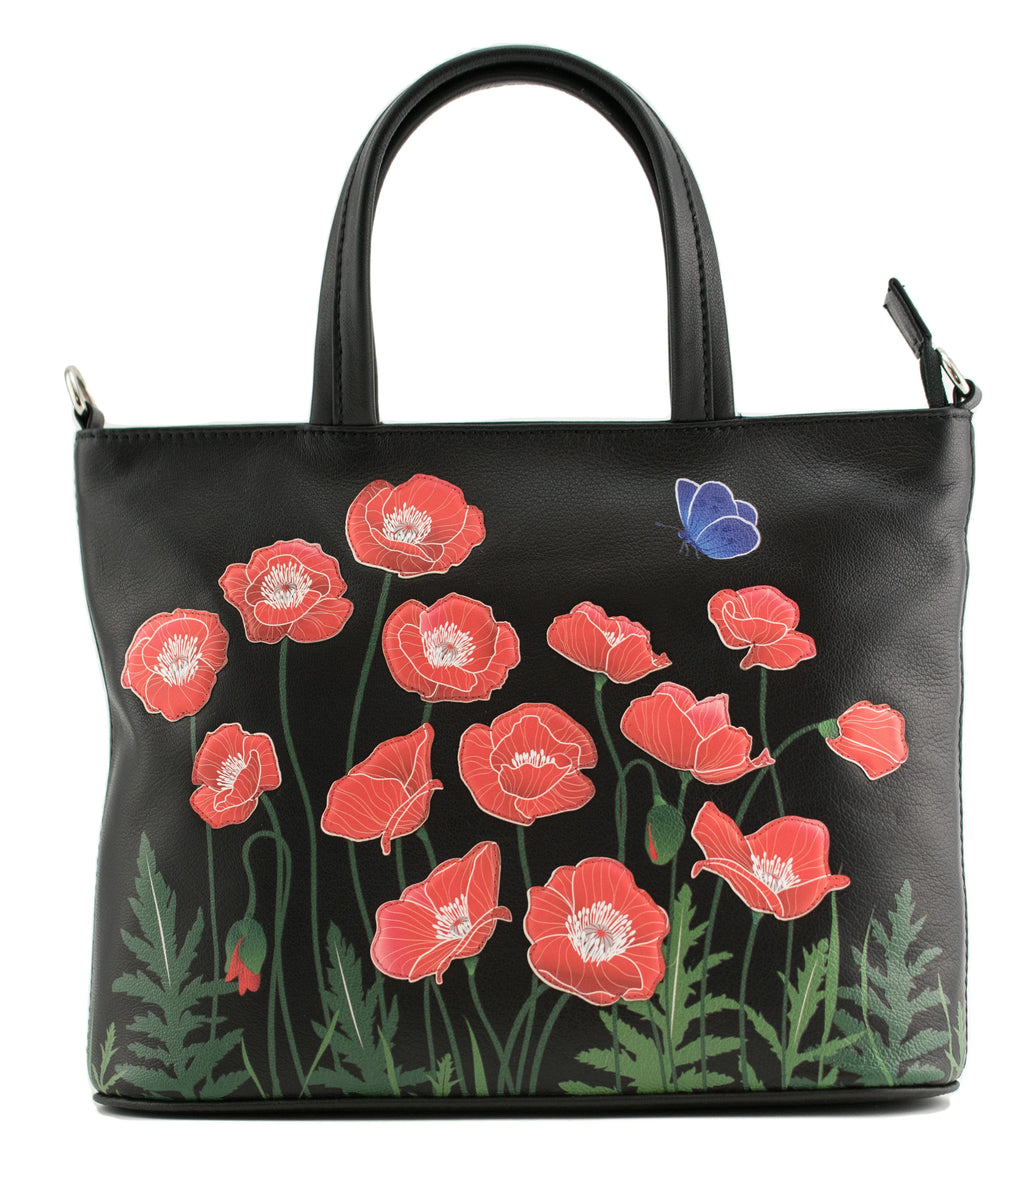 *NEW IN* Mala -Poppy Grab Bag with Detachable Shoulder Strap